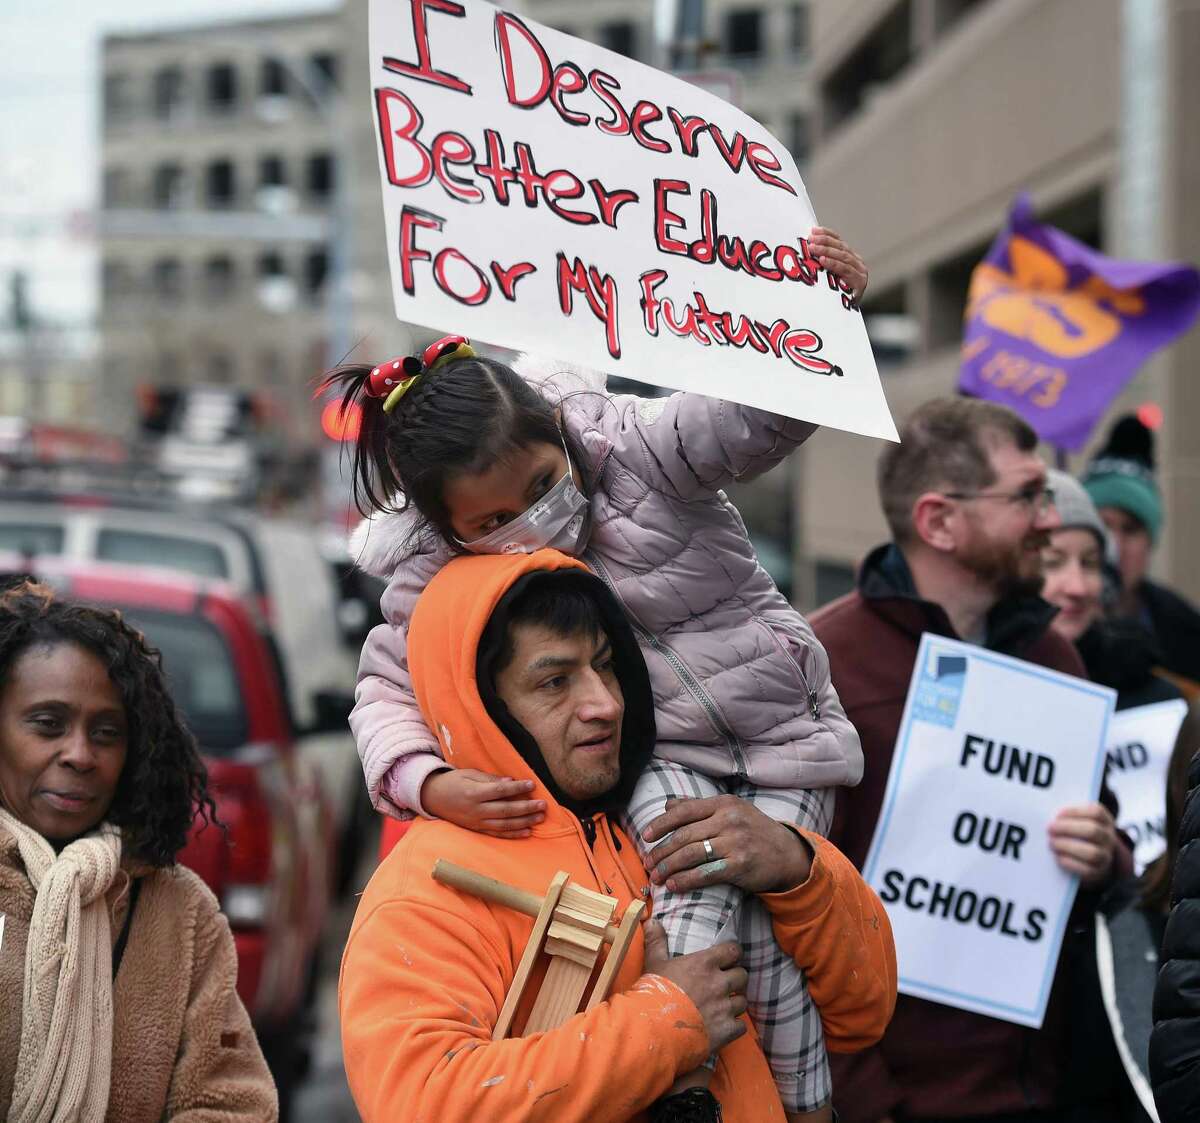 Walter Bueno of New Haven holds his daughter, Brianna, 5, during a protest calling for more funding for education in front of Board of Education offices before a march to City Hall in New Haven on March 30, 2022.